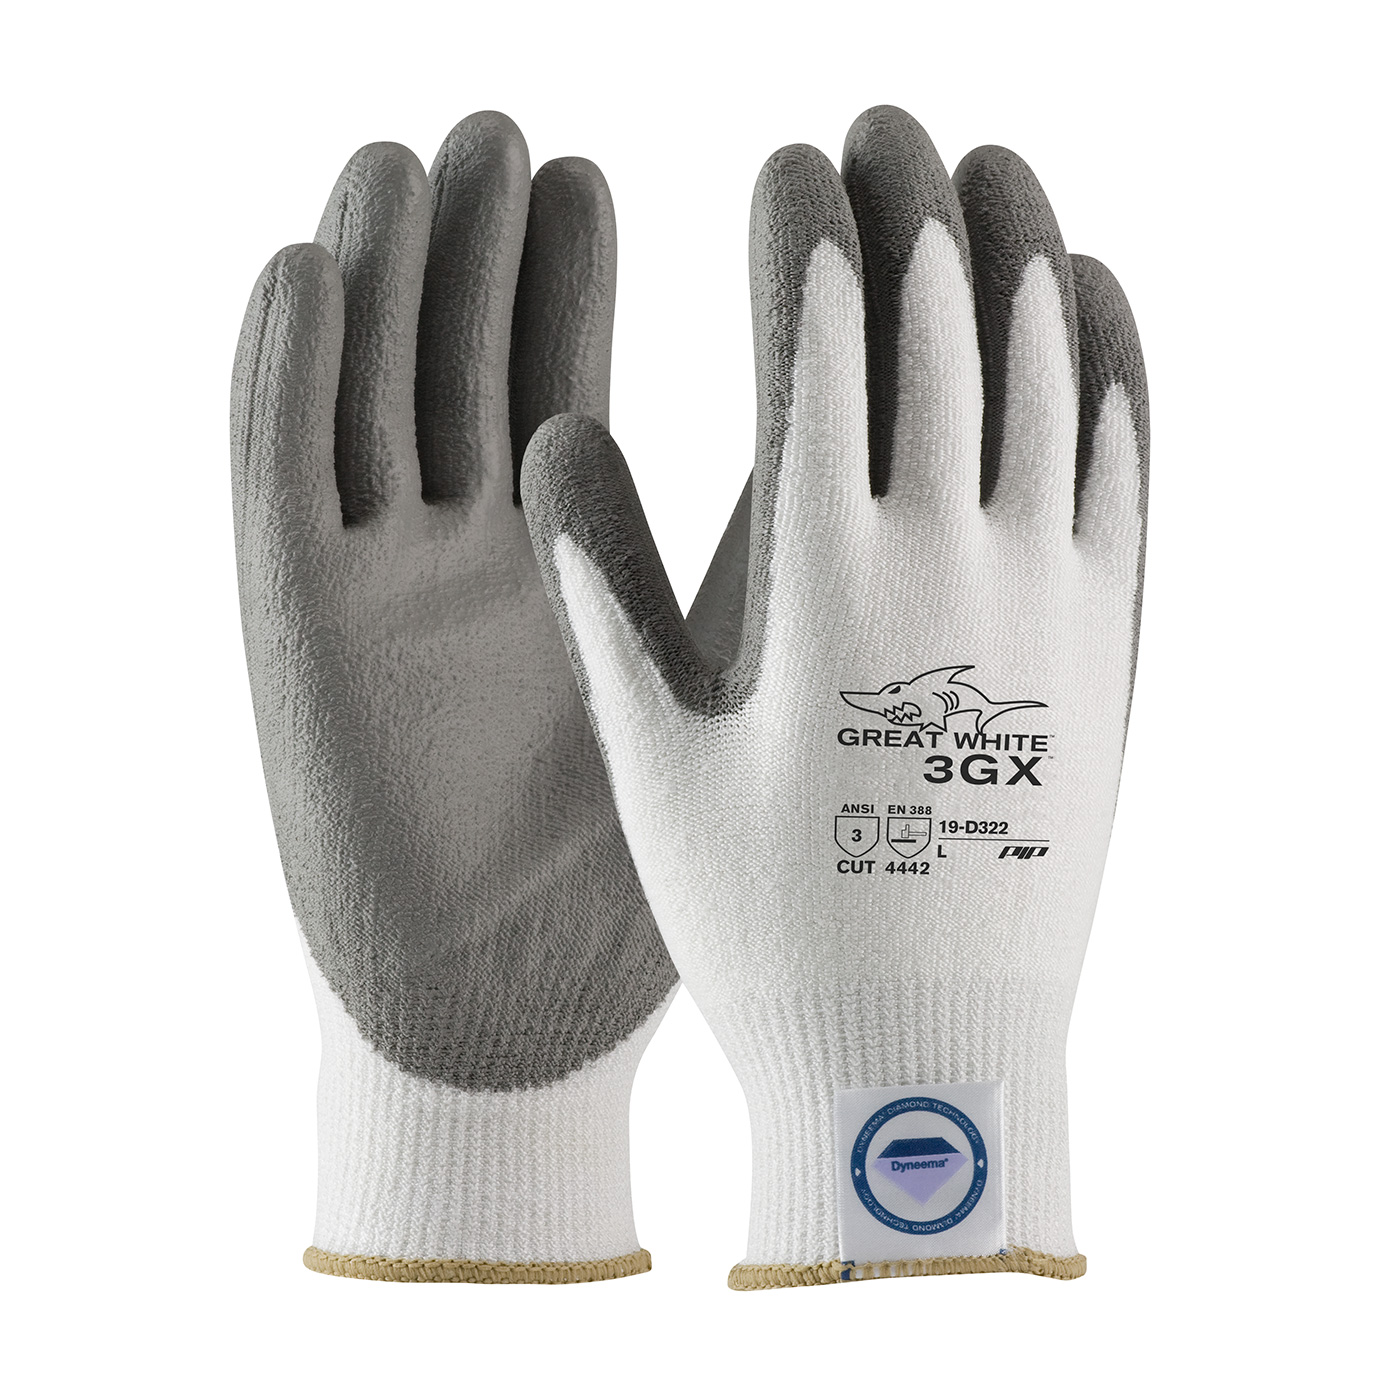 PIP 19-D322/L Great White 3GX Seamless Knit Dyneema Diamond Blended Glove with Polyurethane Coated Smooth Grip on Palm & Fingers - Large PID-19 D322 L